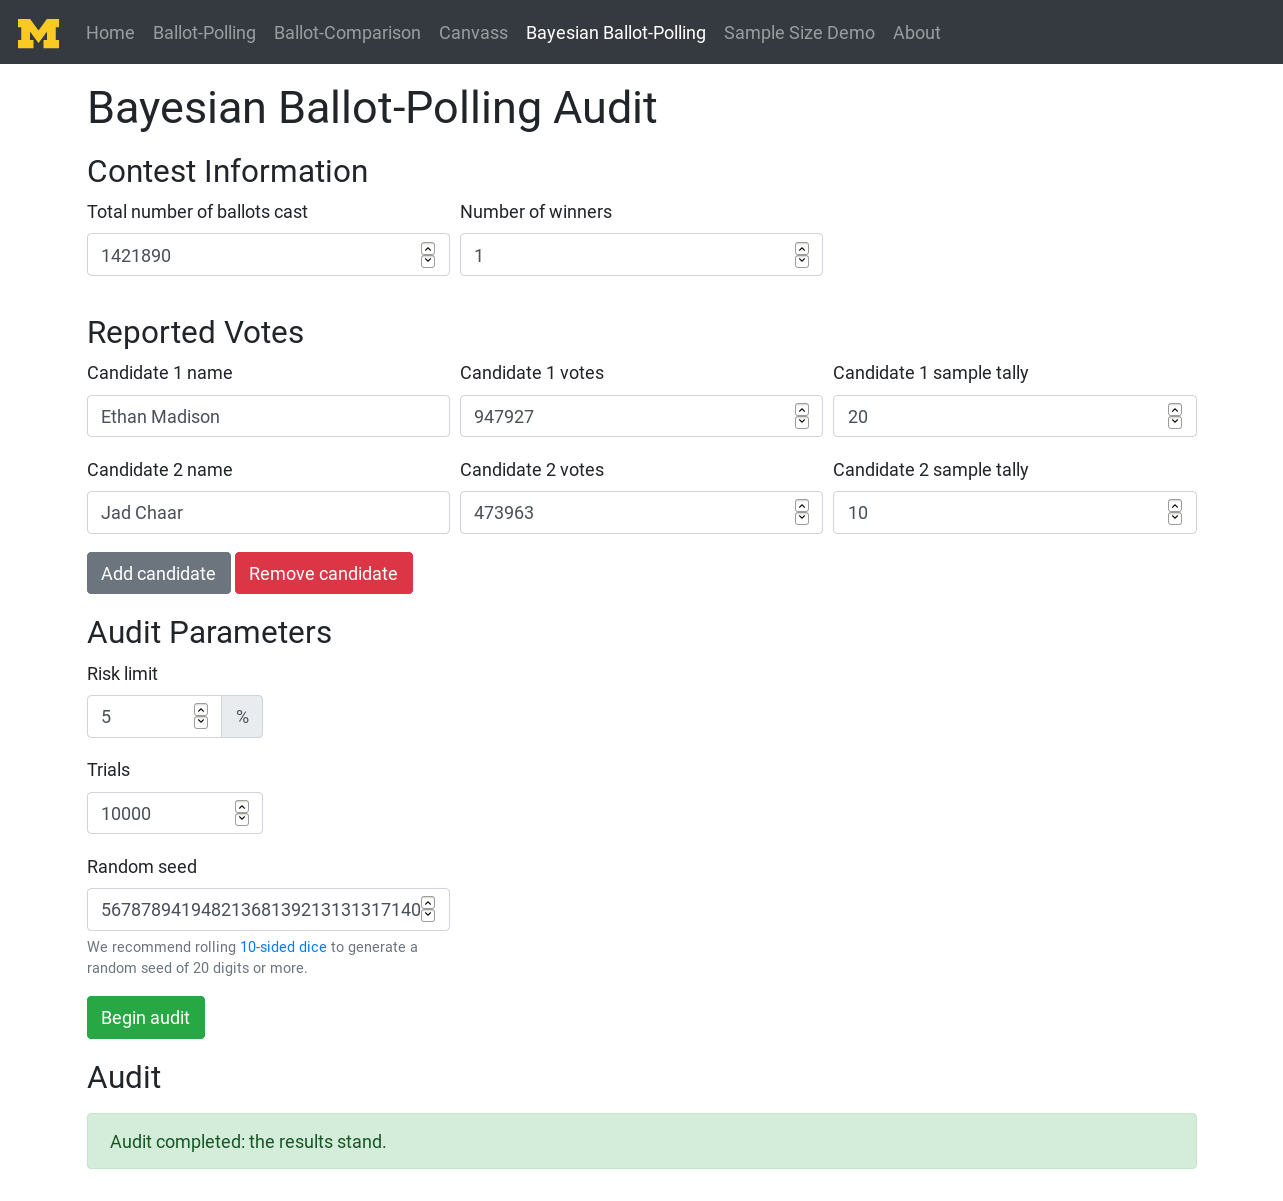 Bayesian audit methods are different from other risk-limiting audits in that the work is front-loaded: the user first checks some ballots then asks the tool if this auditing is enough to confirm the election results.